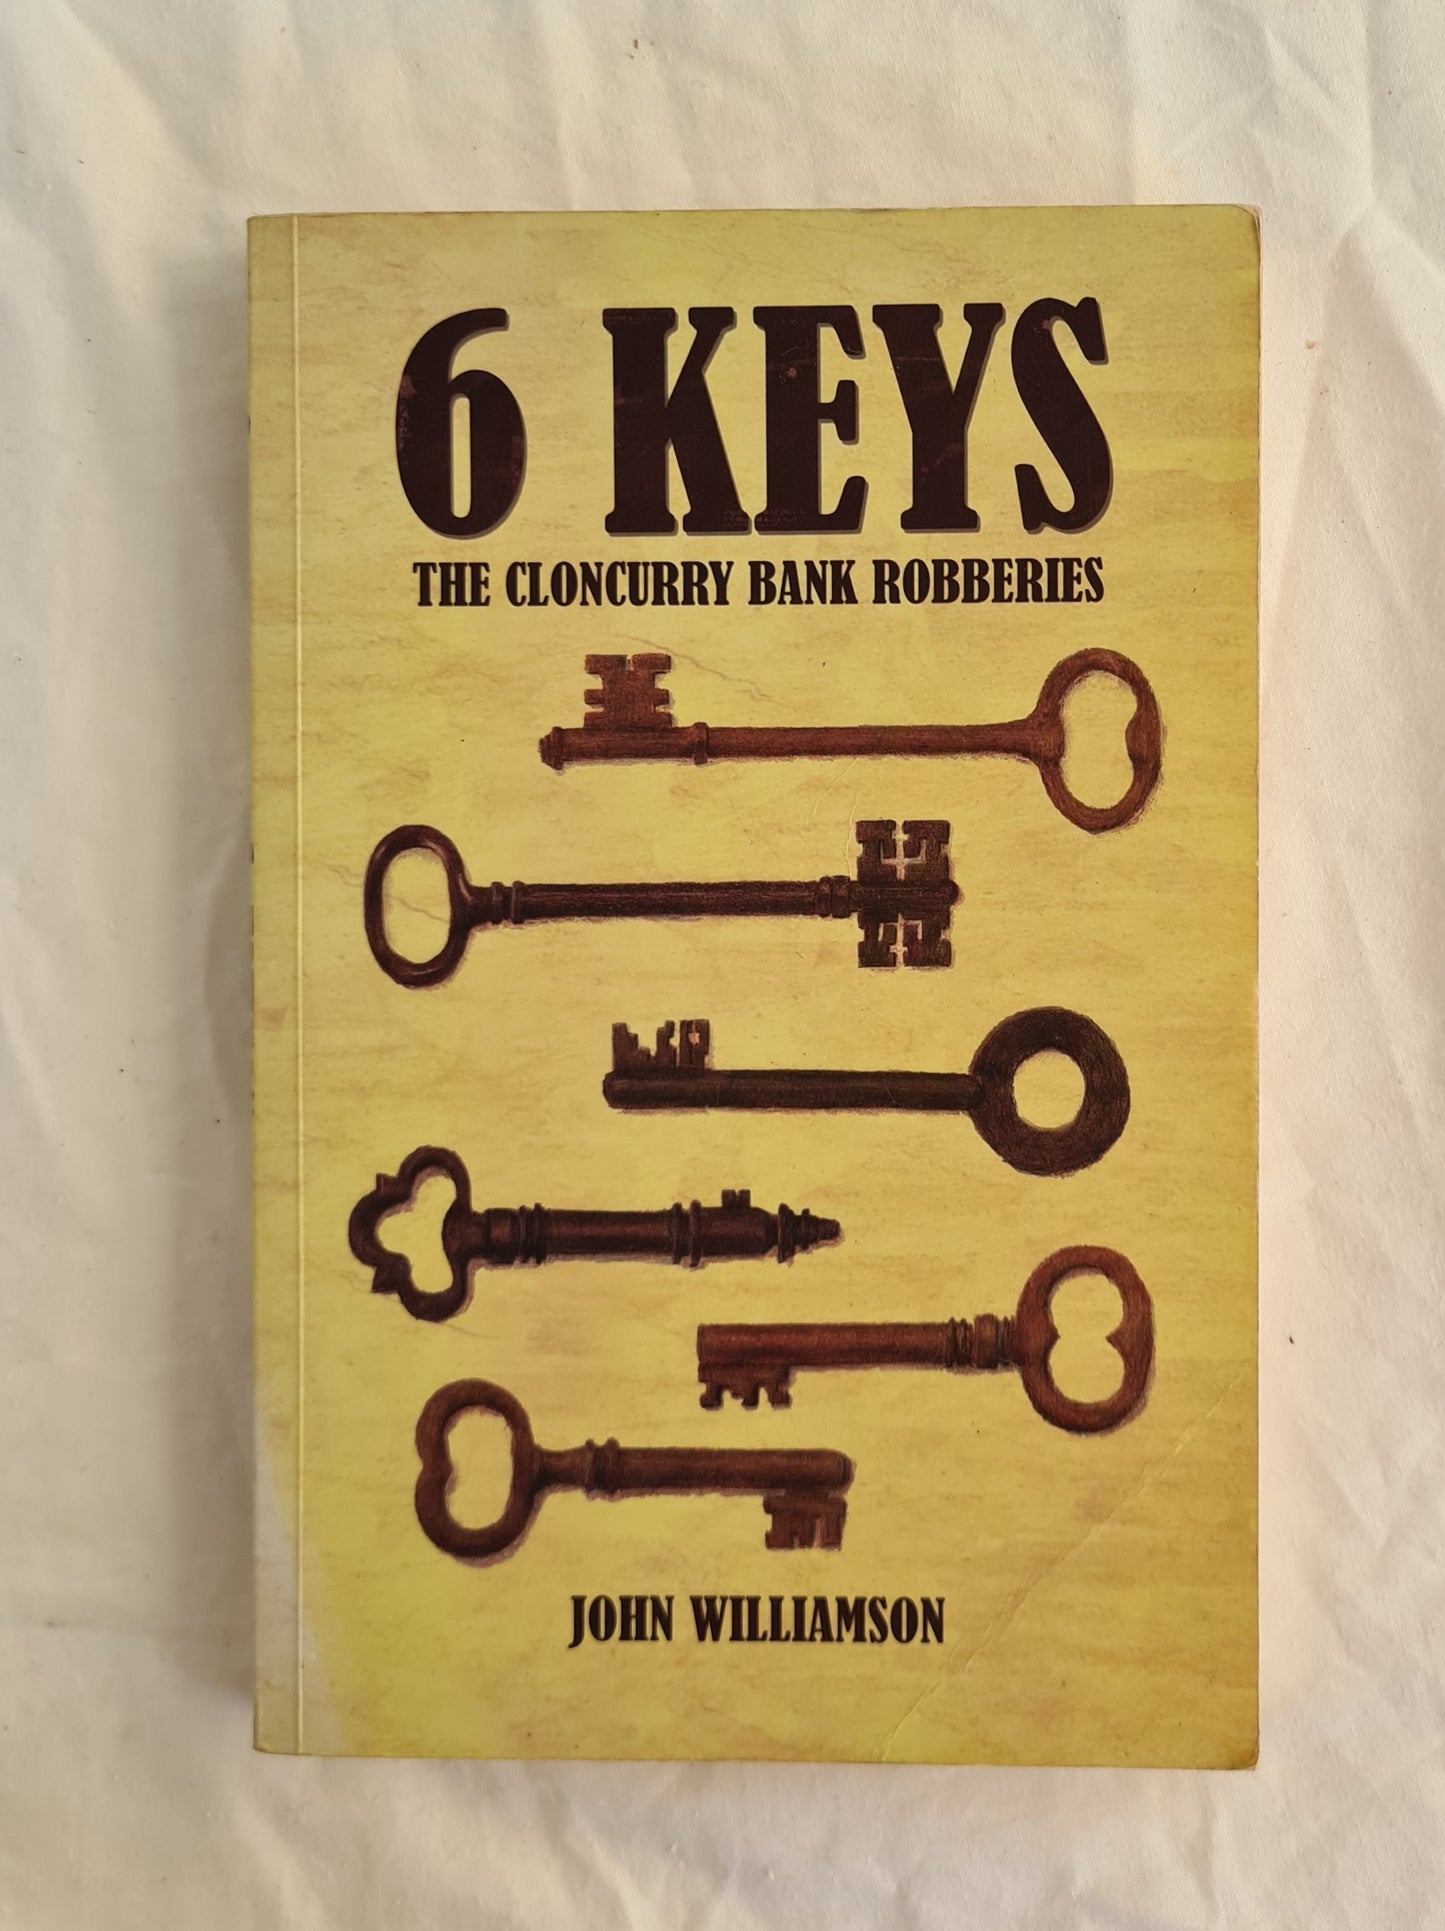 Six Keys  The Cloncurry Bank Robberies  by John Williamson